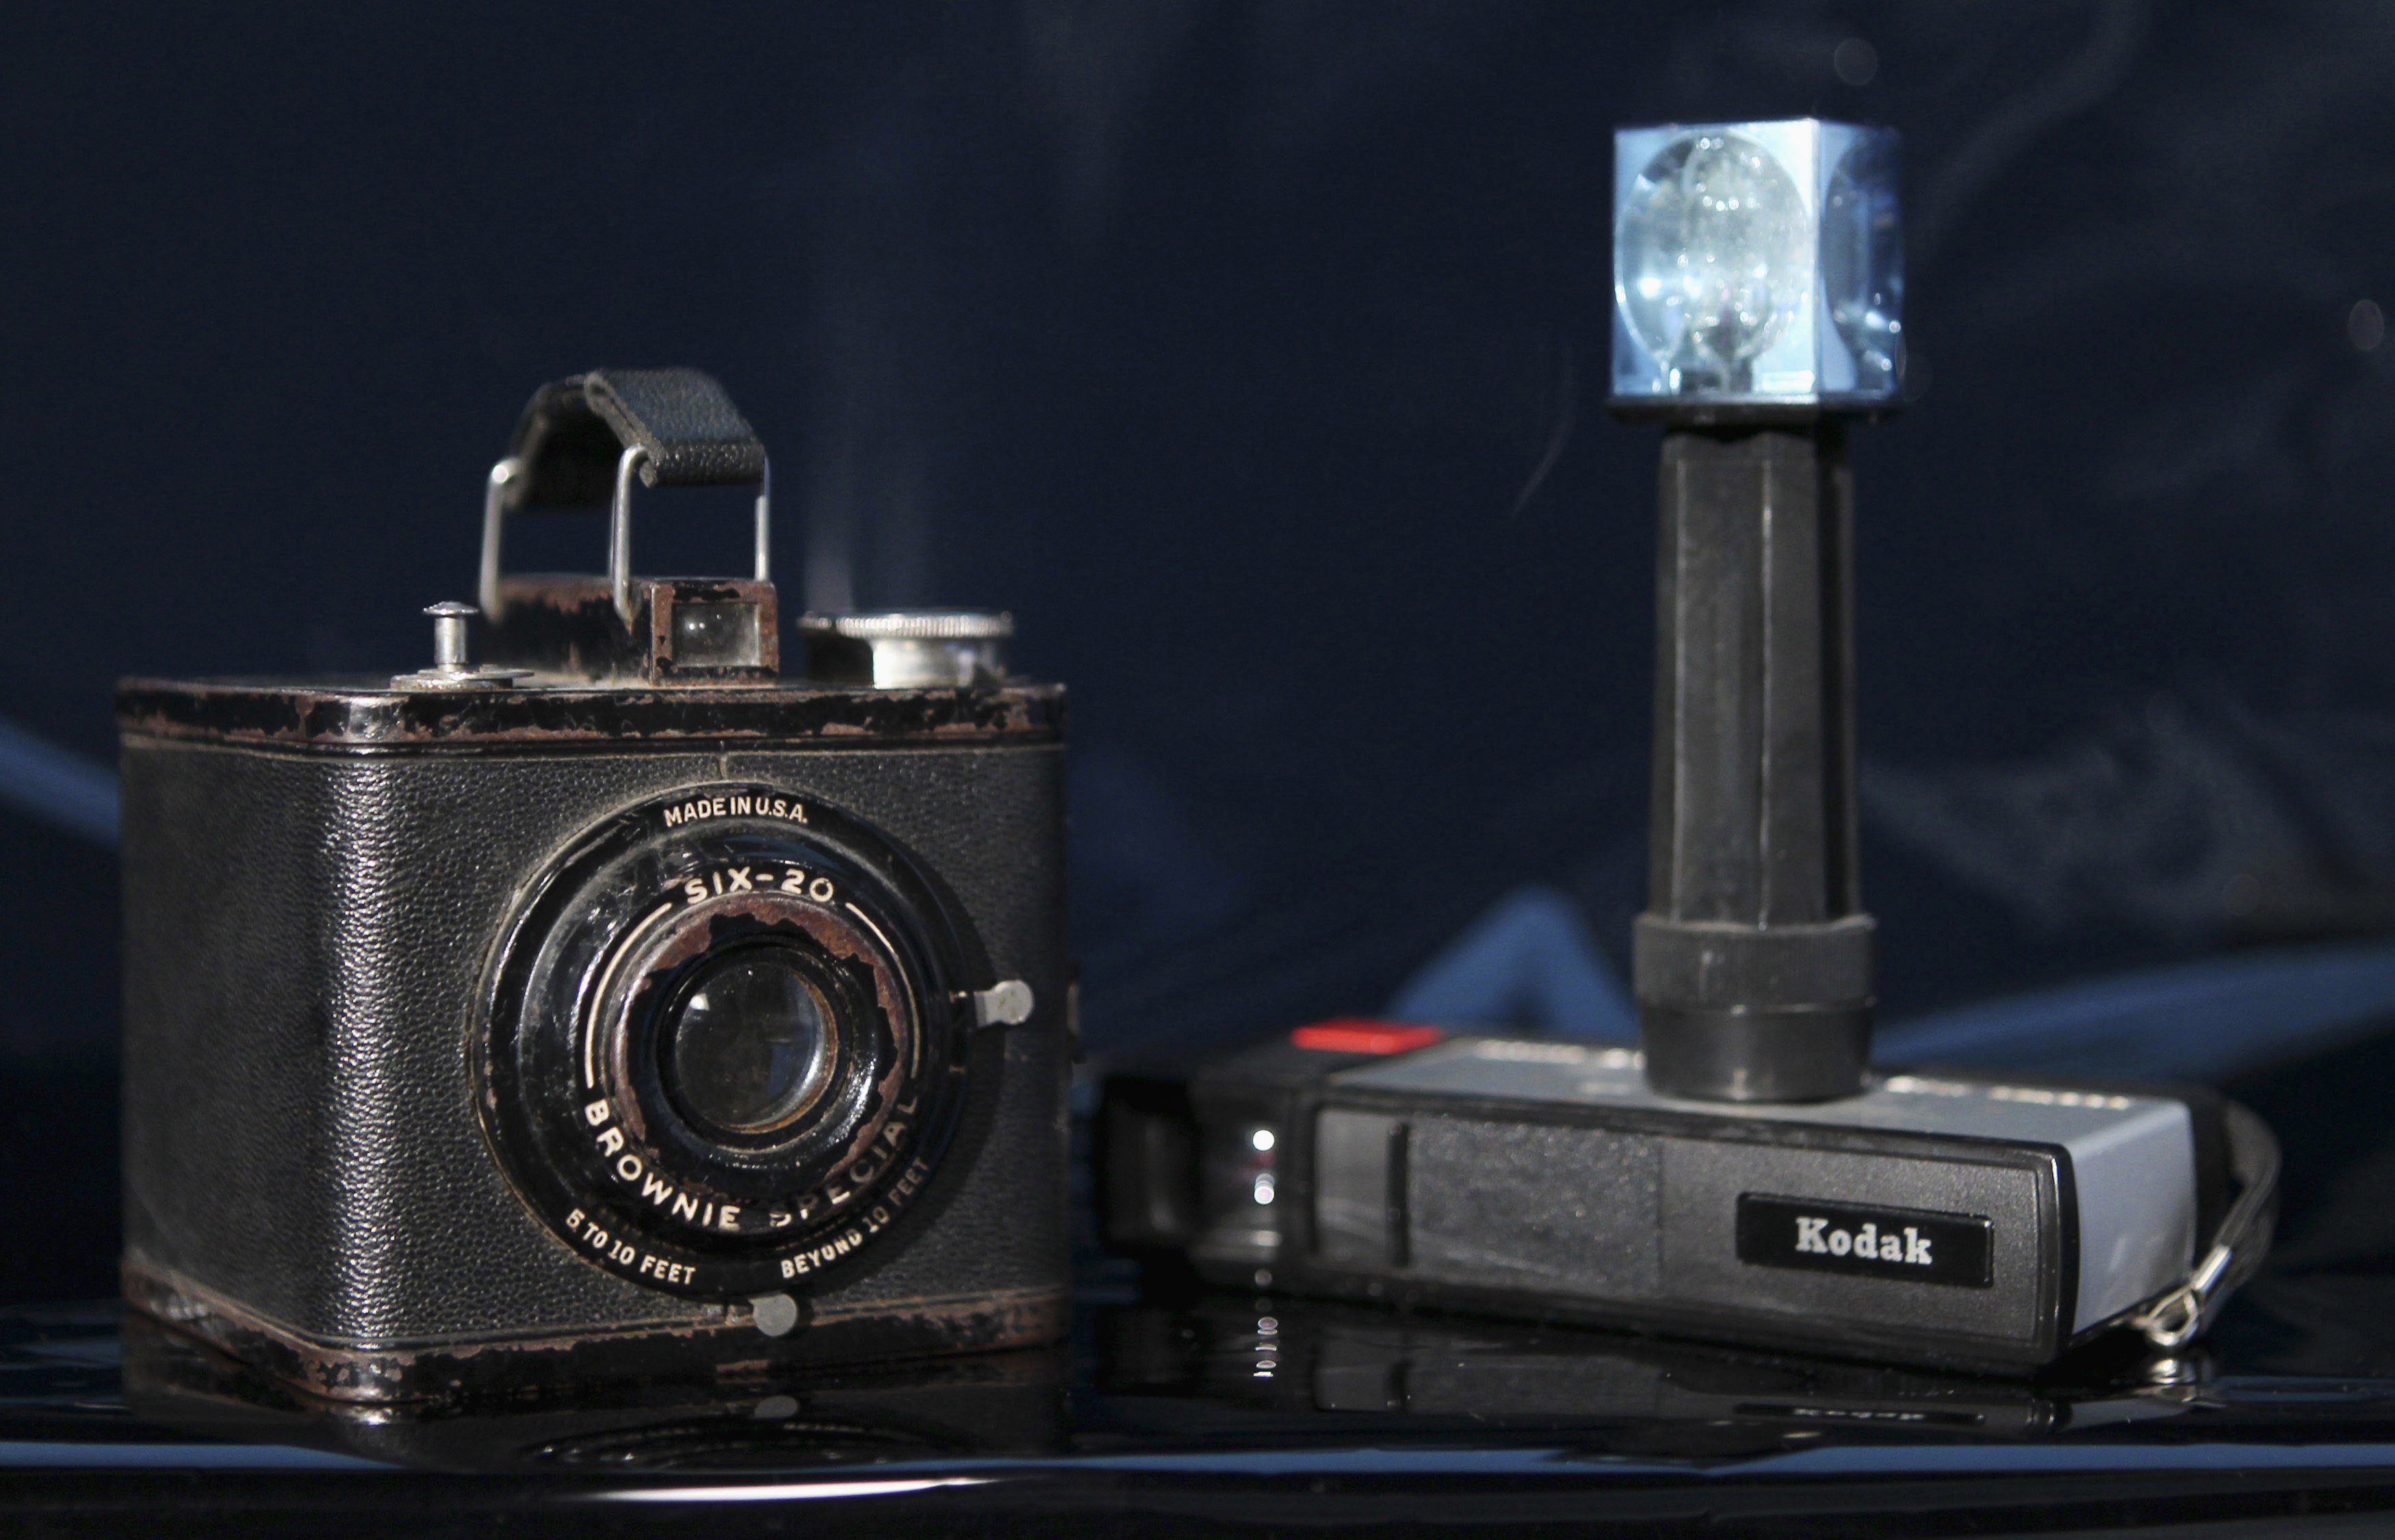 Kodak once dominated the camera market with products like its Brownie Special Six-20 (left), and the Pocket Instamatic 20 (right), but the advent of digital cameras helped push it into bankruptcy. Photo: Reuters